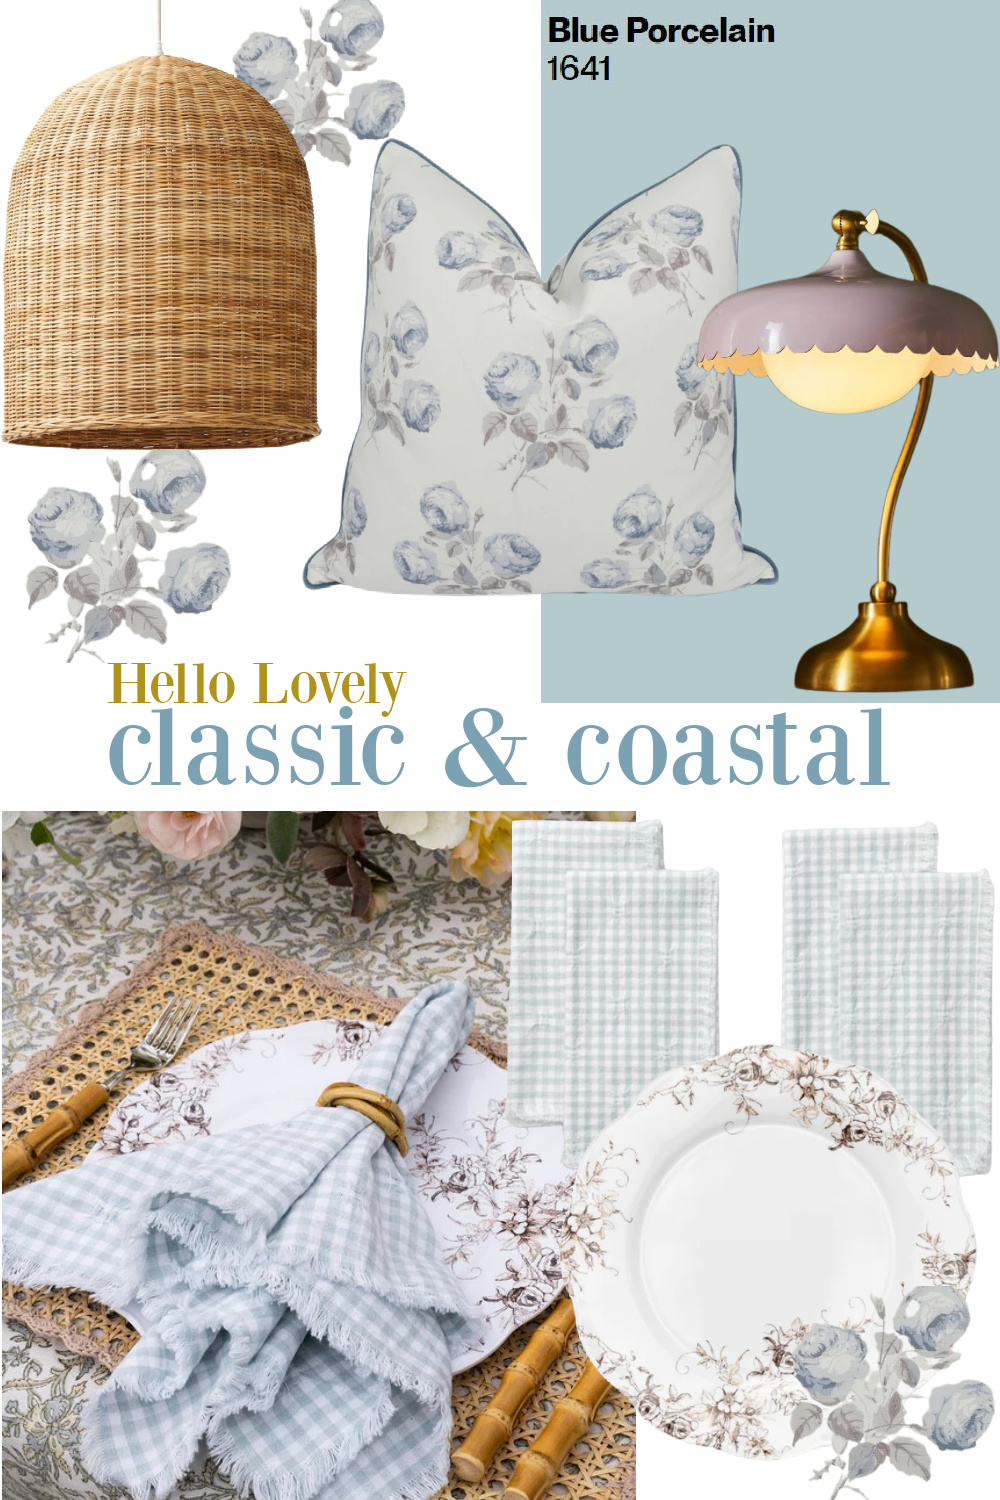 Classic & Coastal mood board by Hello Lovely with home decor resources to score a stunning seaside retreat inspired look. #coastaldecor #classicinteriordesign